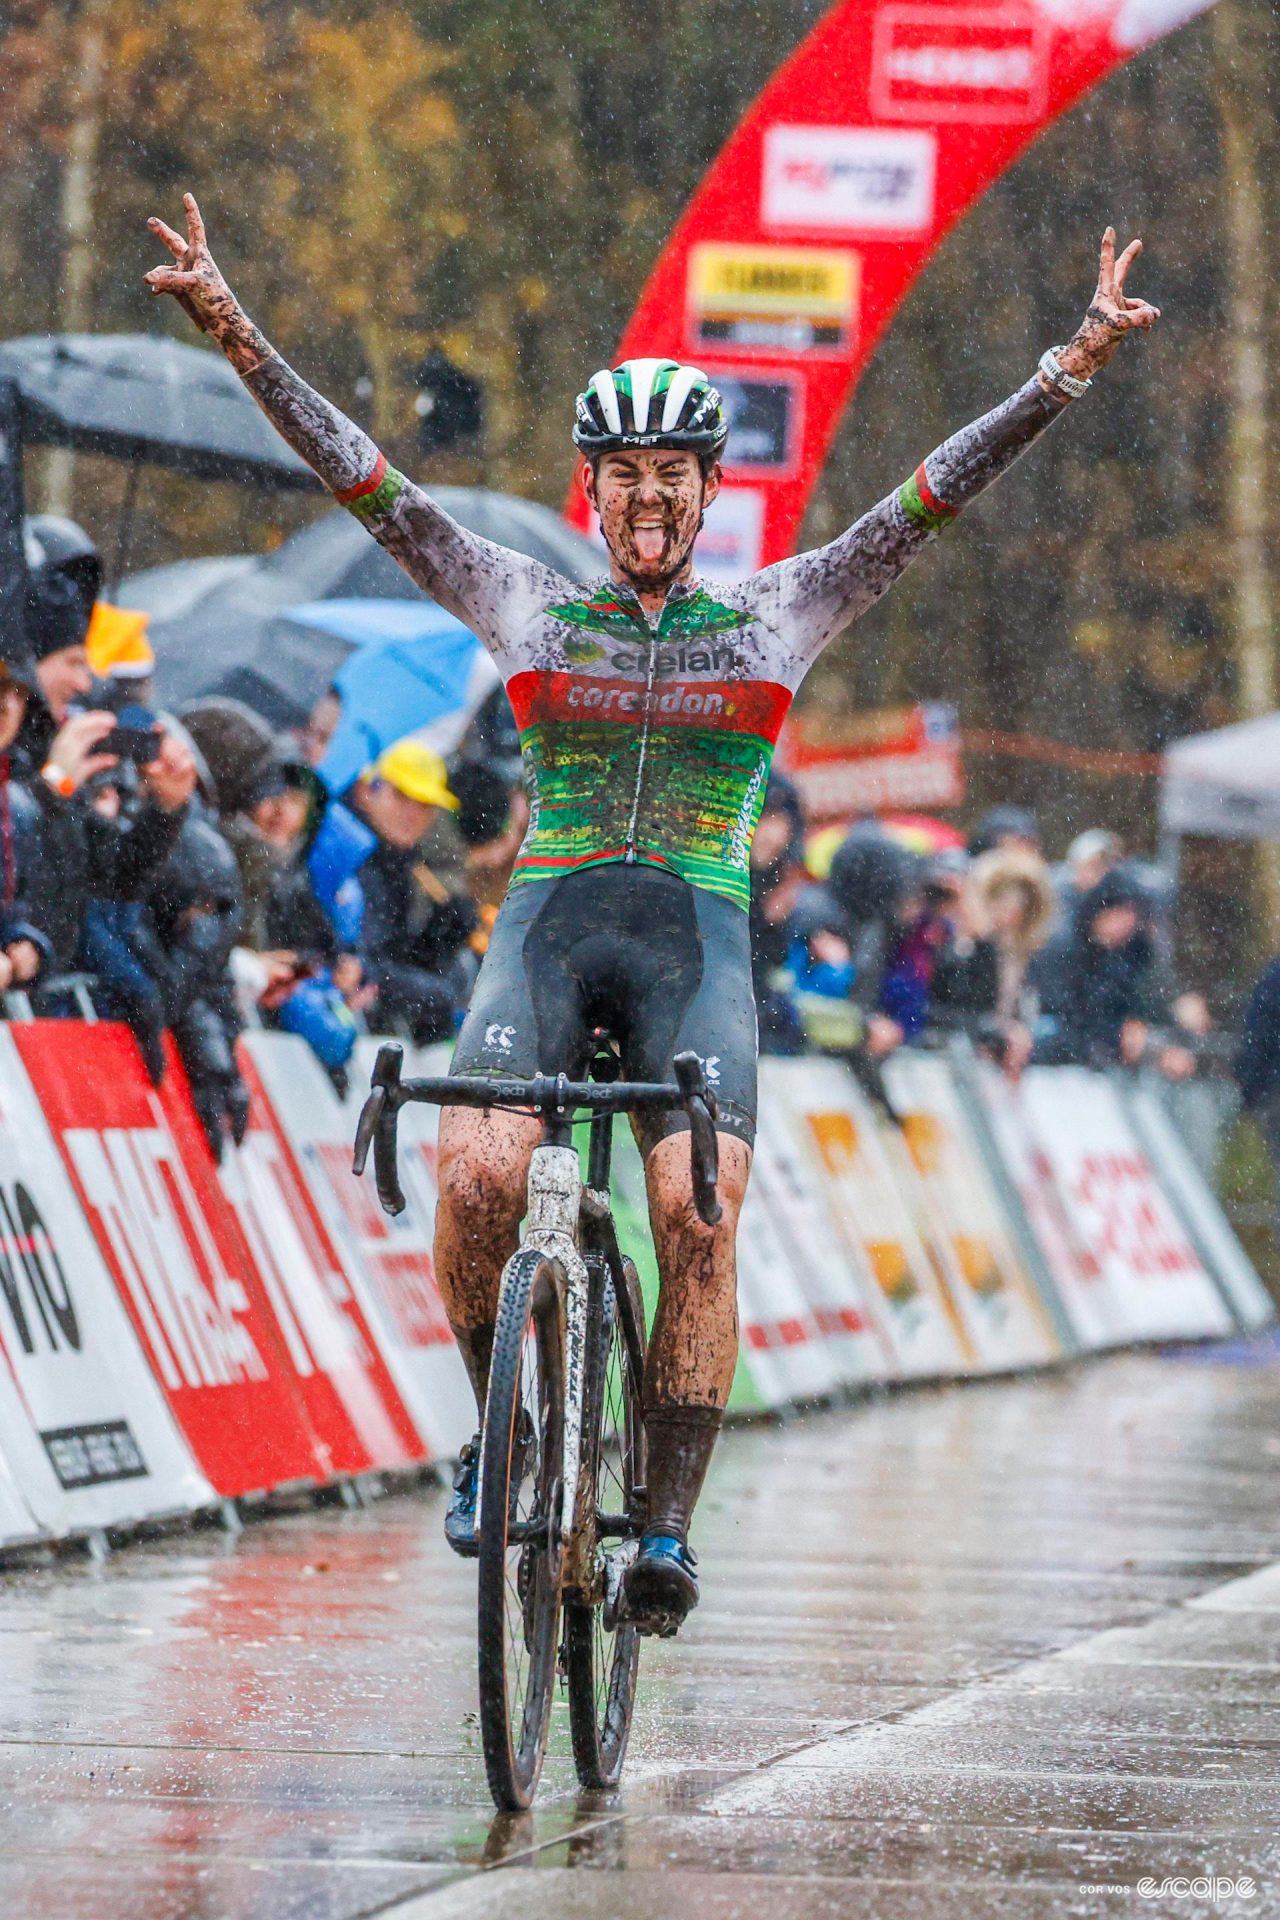 Marion Norbert Riberolle celebrates victory at a very wet and muddy Exact Cross Essen.